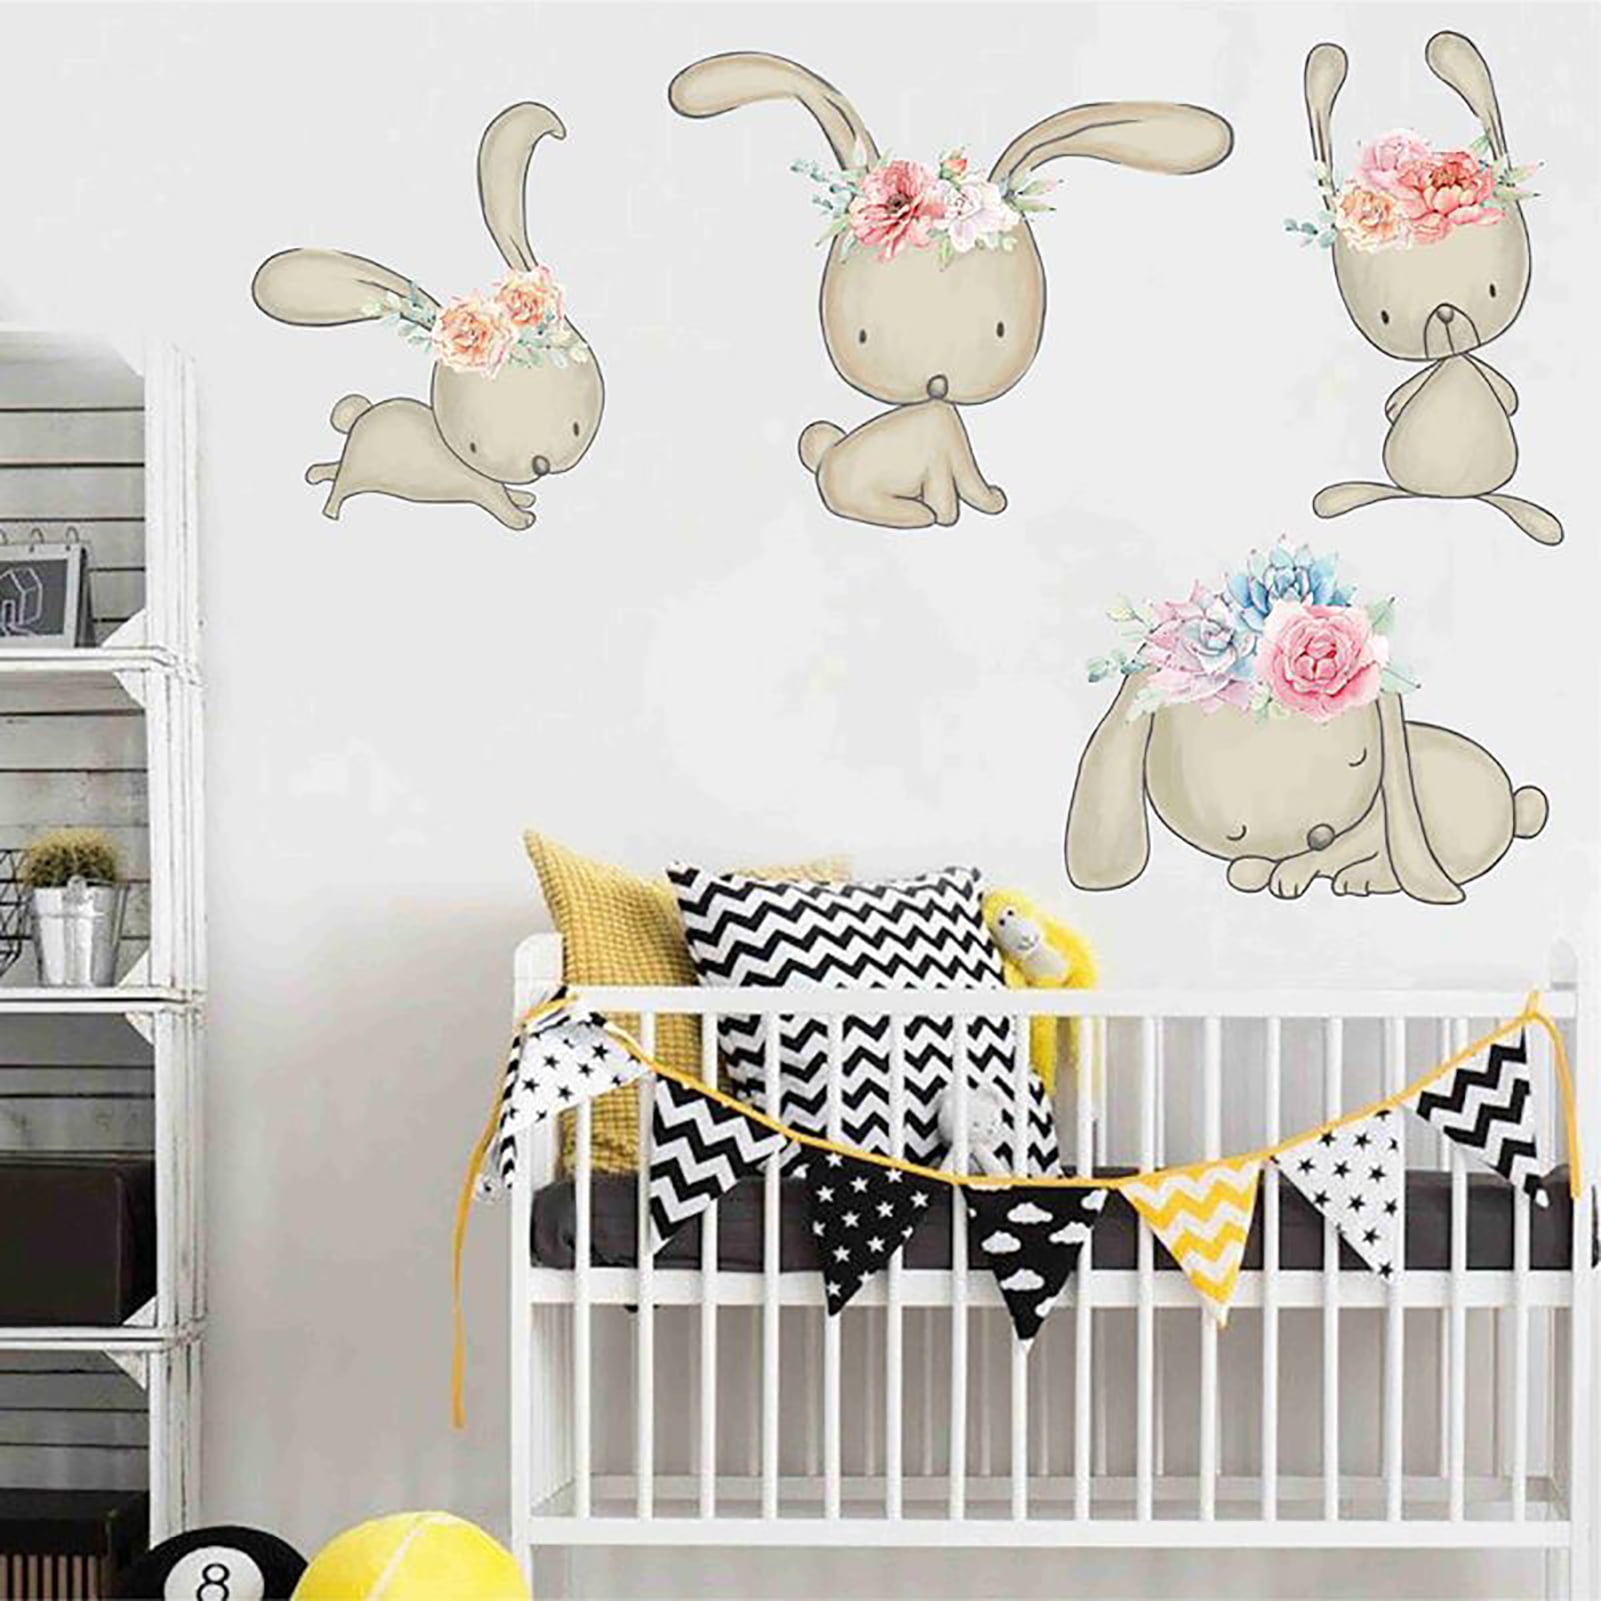 16 Rabbit stickers Nursery Decal for DIY kid play room wall decor bedroom Easter 